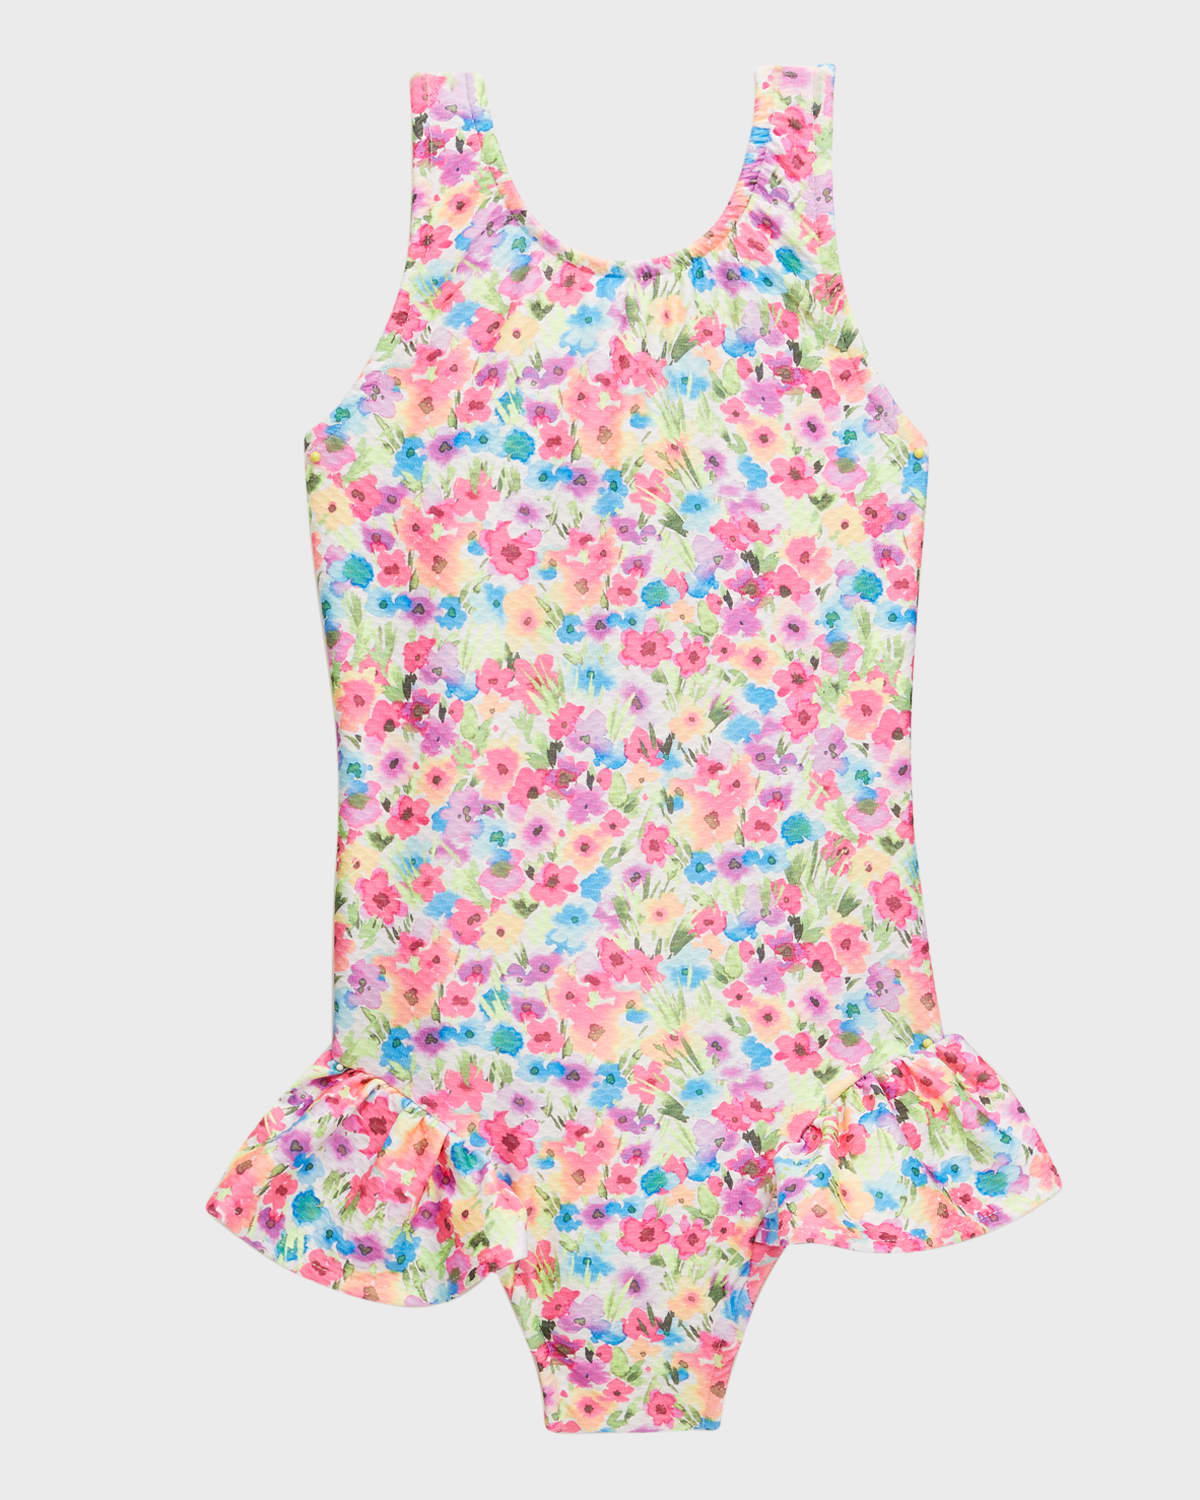 FLORENCE EISEMAN GIRL'S FLORAL-PRINT RUFFLE SWIMSUIT